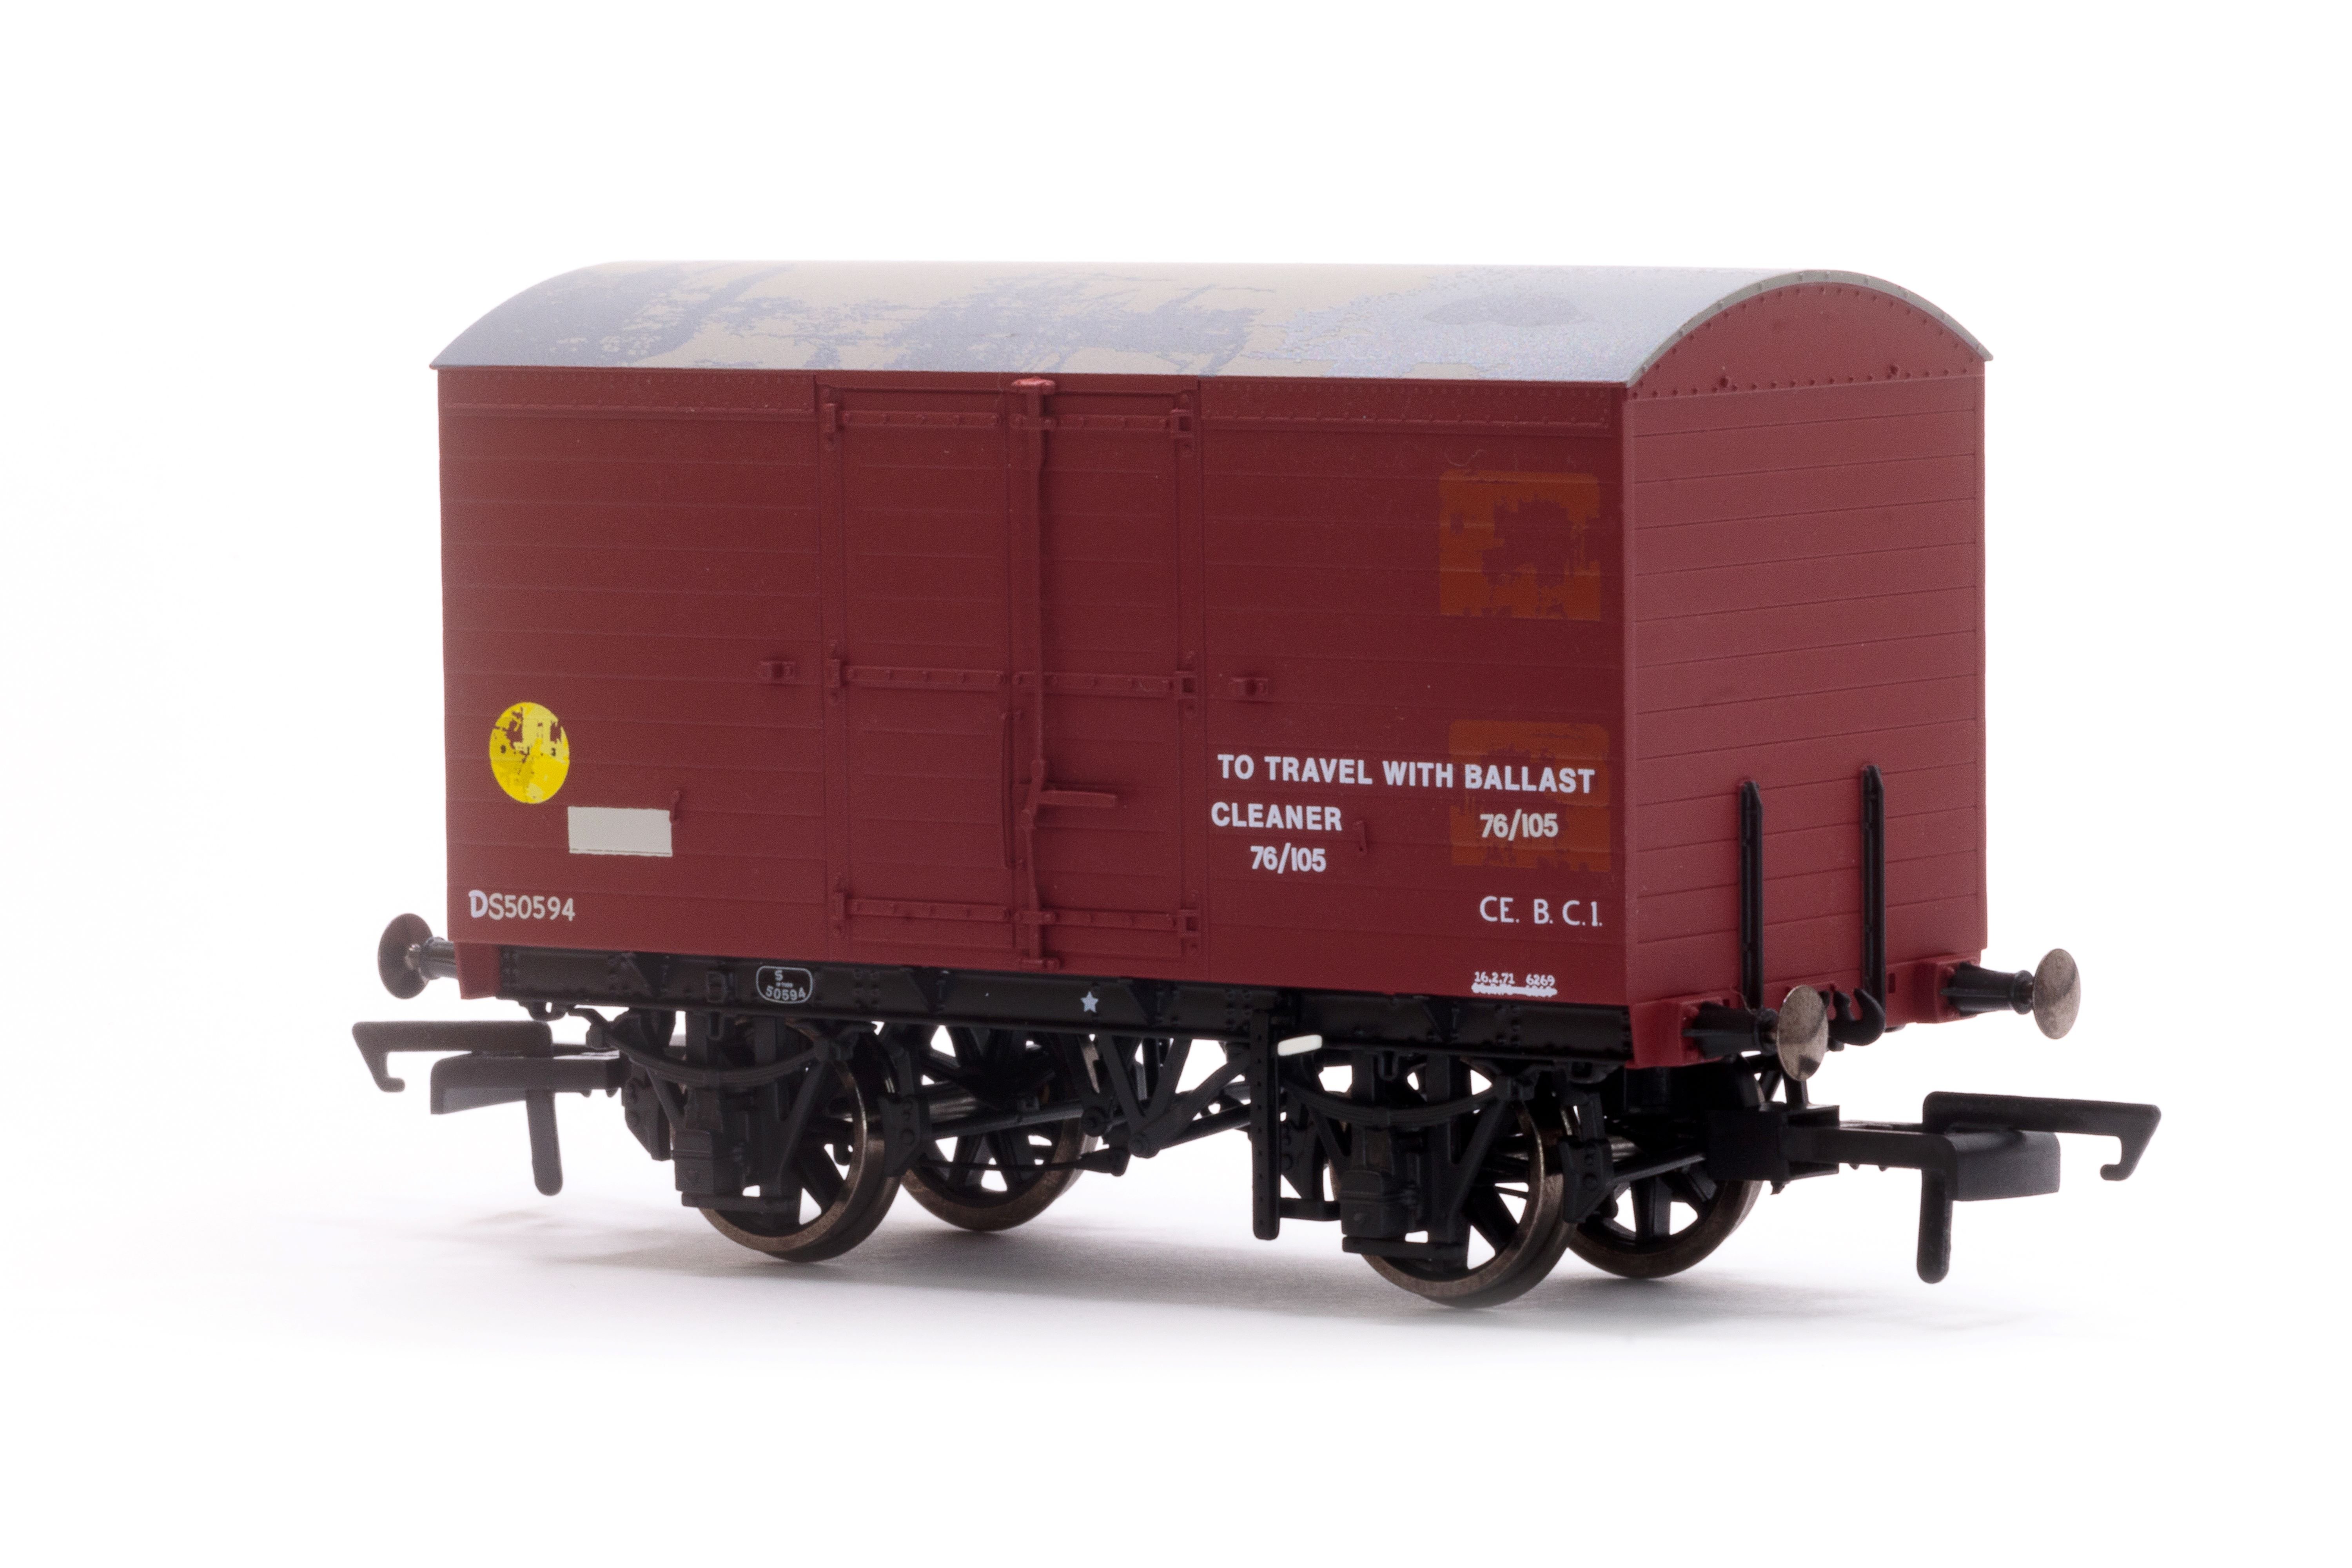 kmw_accurascale_ballast_cleaner_support_3